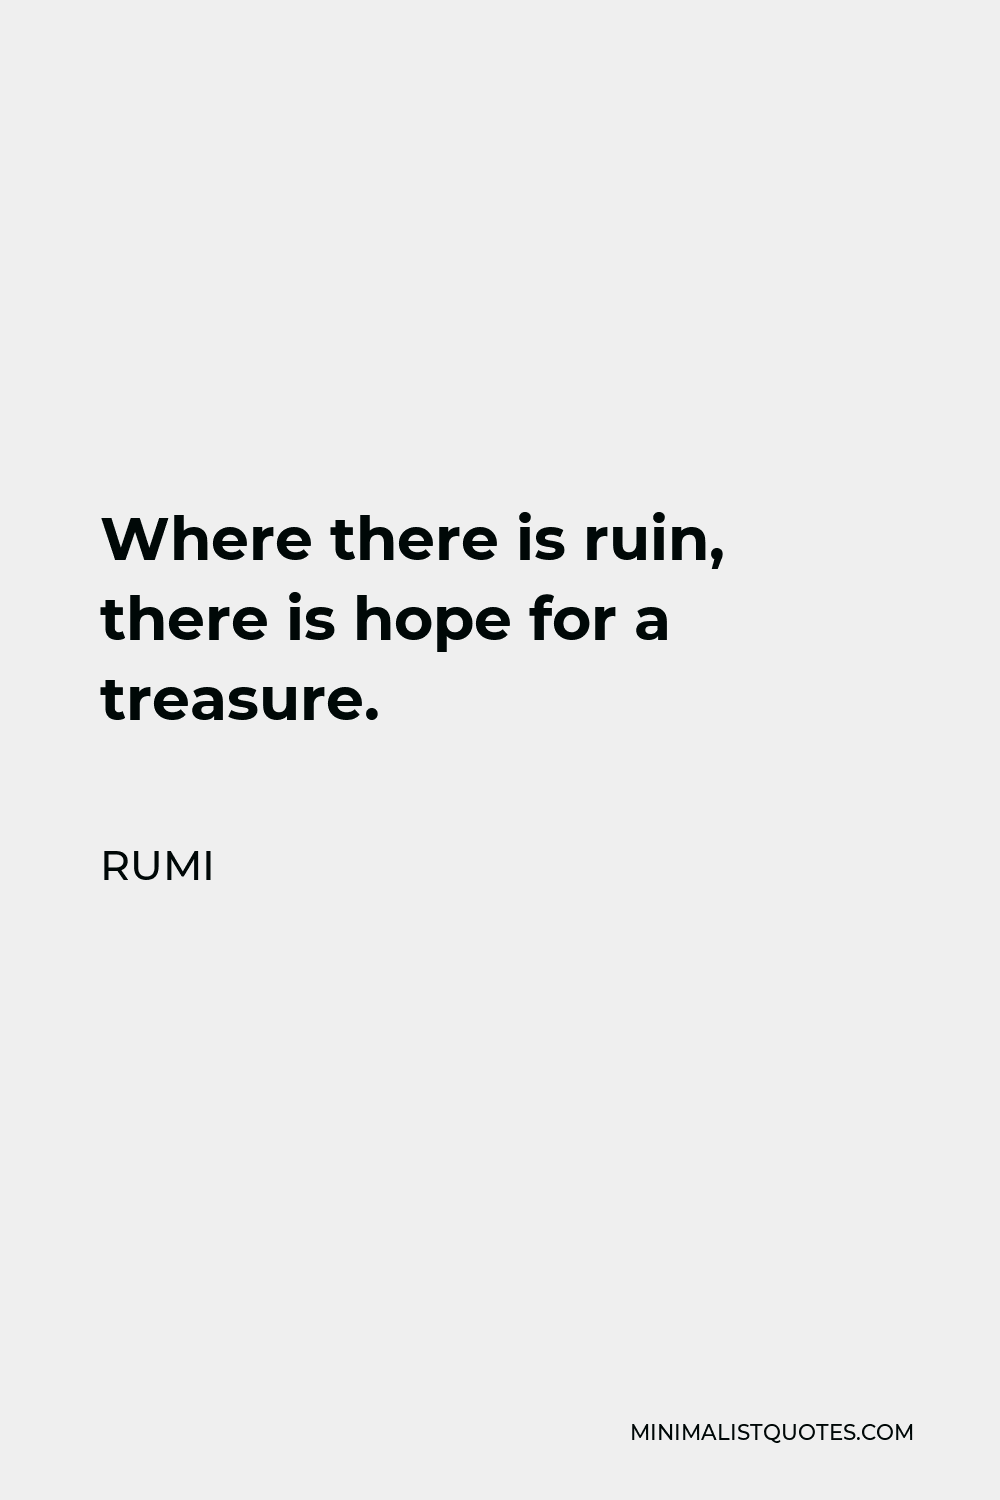 Rumi Quote: Where there is ruin, there is hope for a treasure.